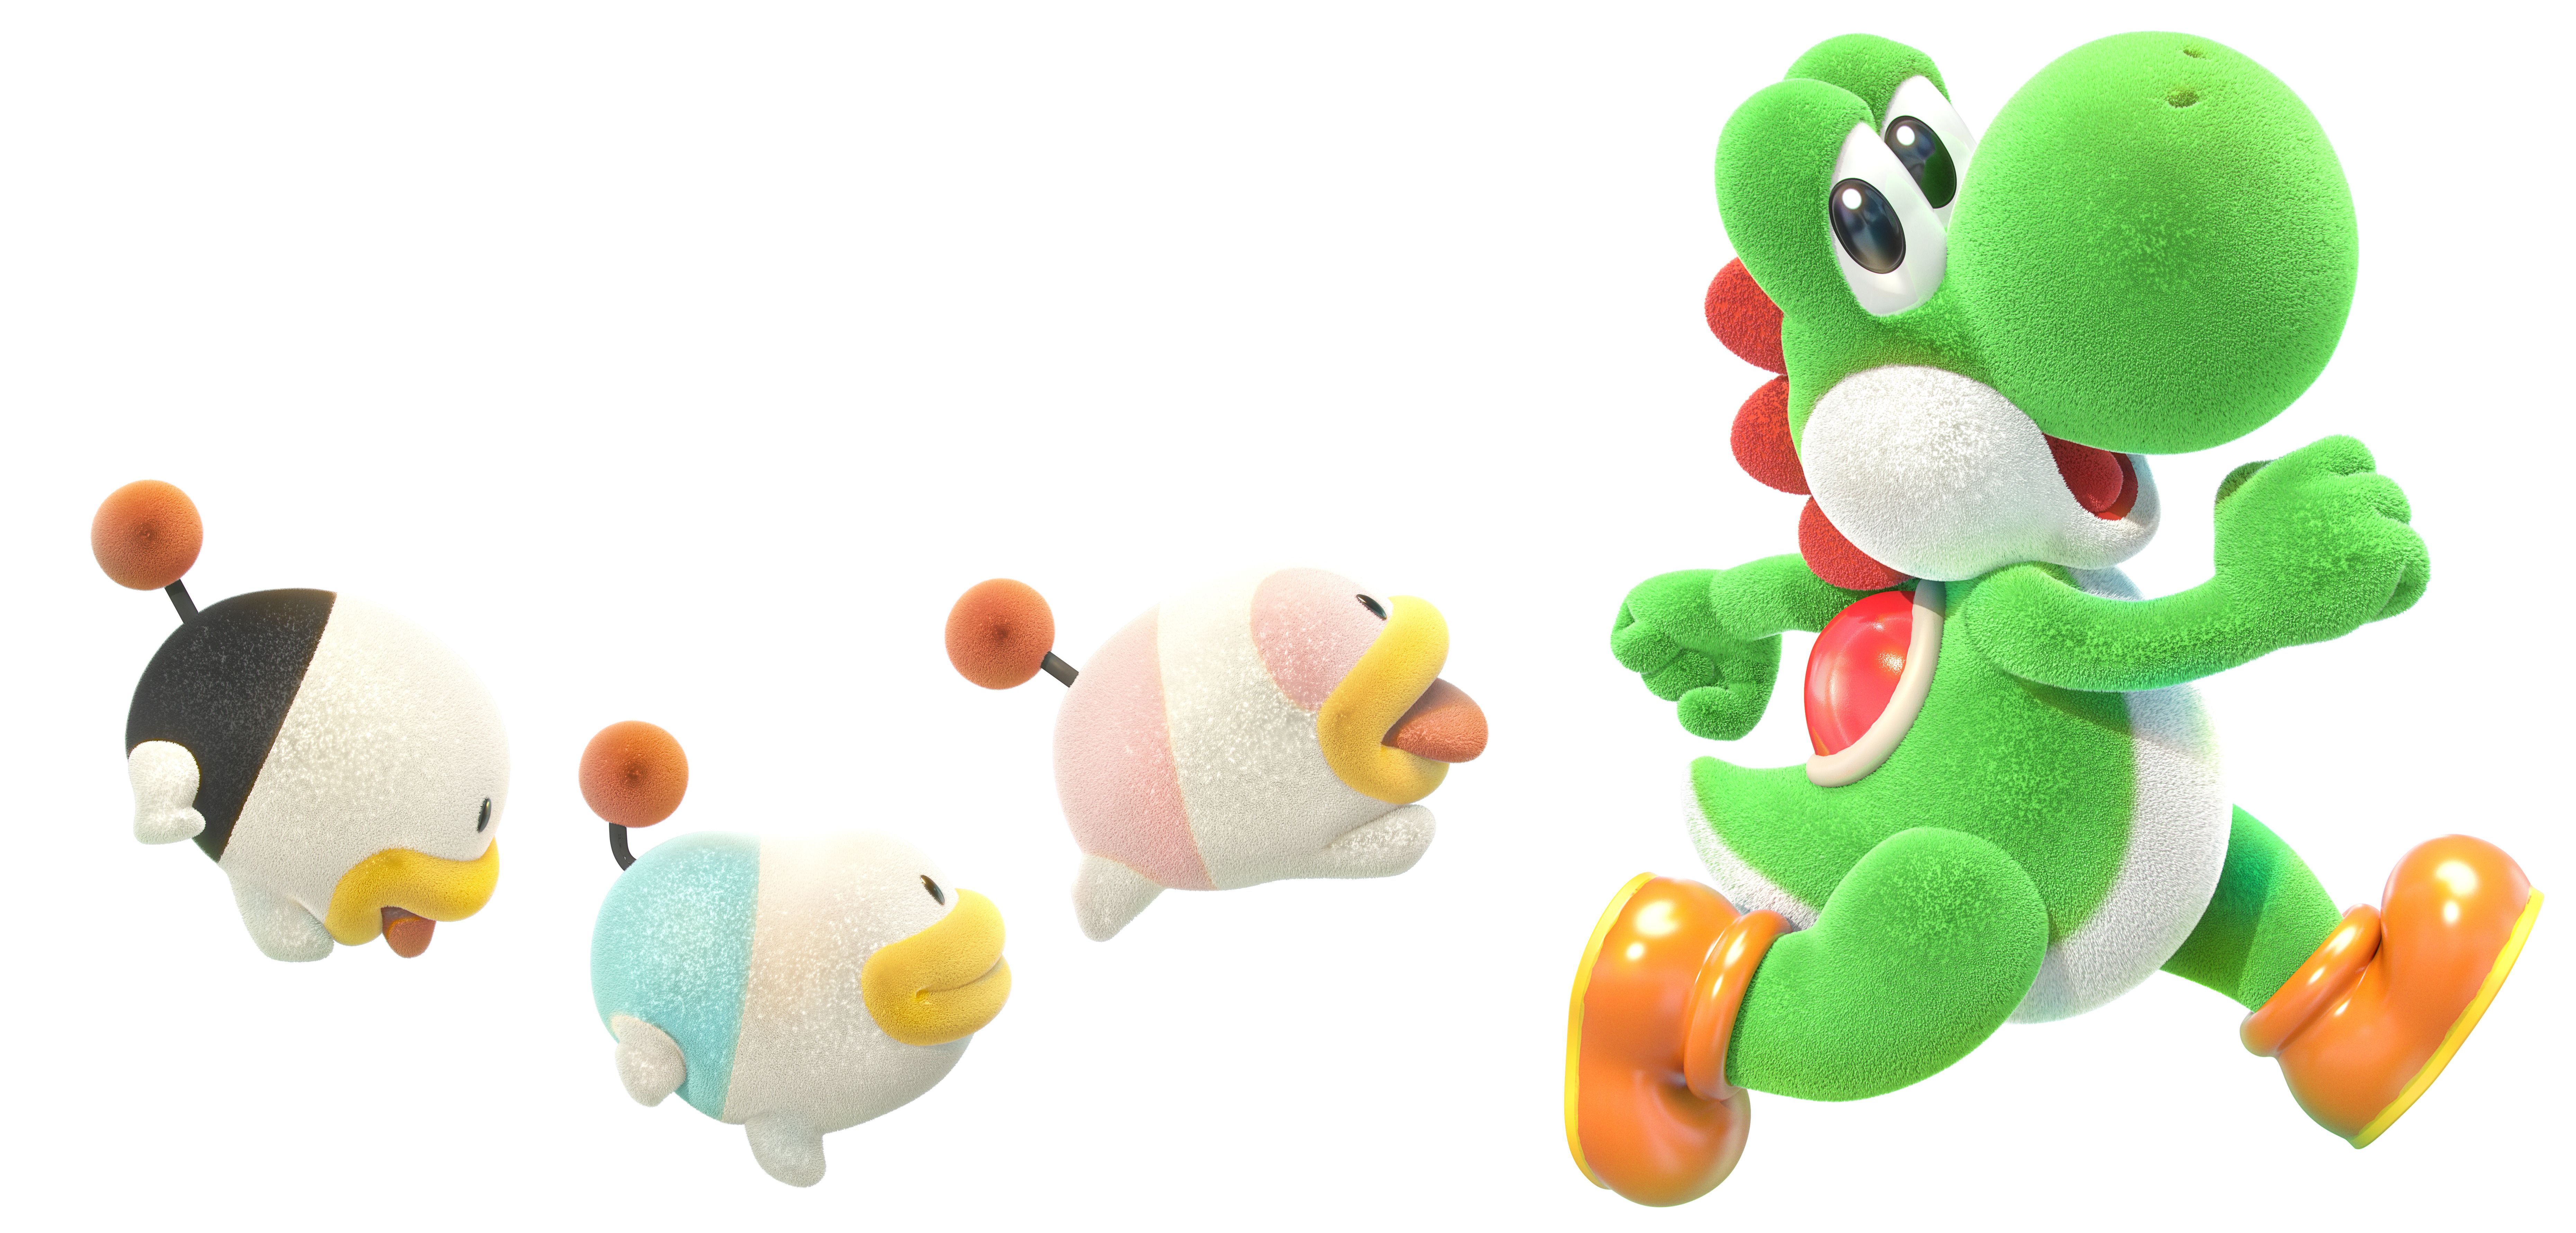 These Image of Yoshi's Crafted World Display True Craftsmanship